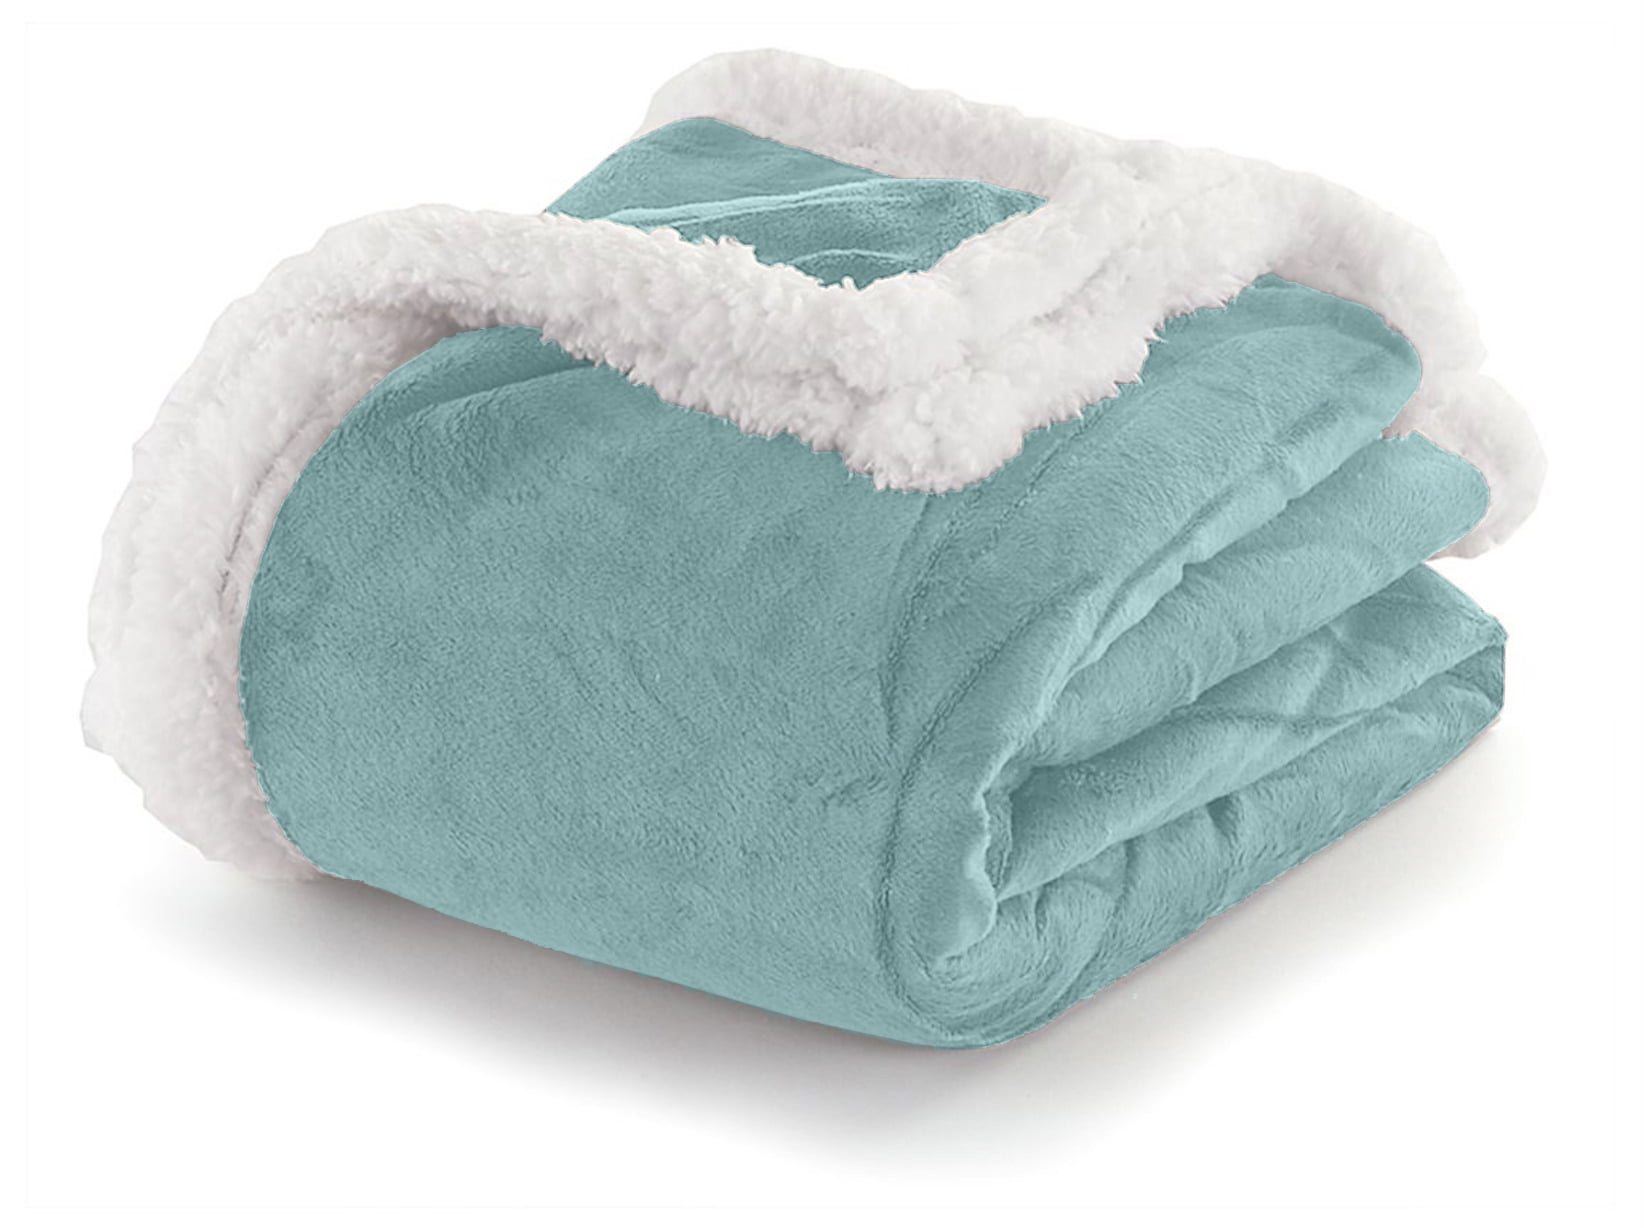 Teal Farmhouse Ombre Throw Blanket Flannel Fleece Blanket Sofa Bed Baby Lightweight Blanket for Women Adult Girl 60 x 50 Turquoise Gradient Hazy Color Microfiber Nap Blanket for Couch